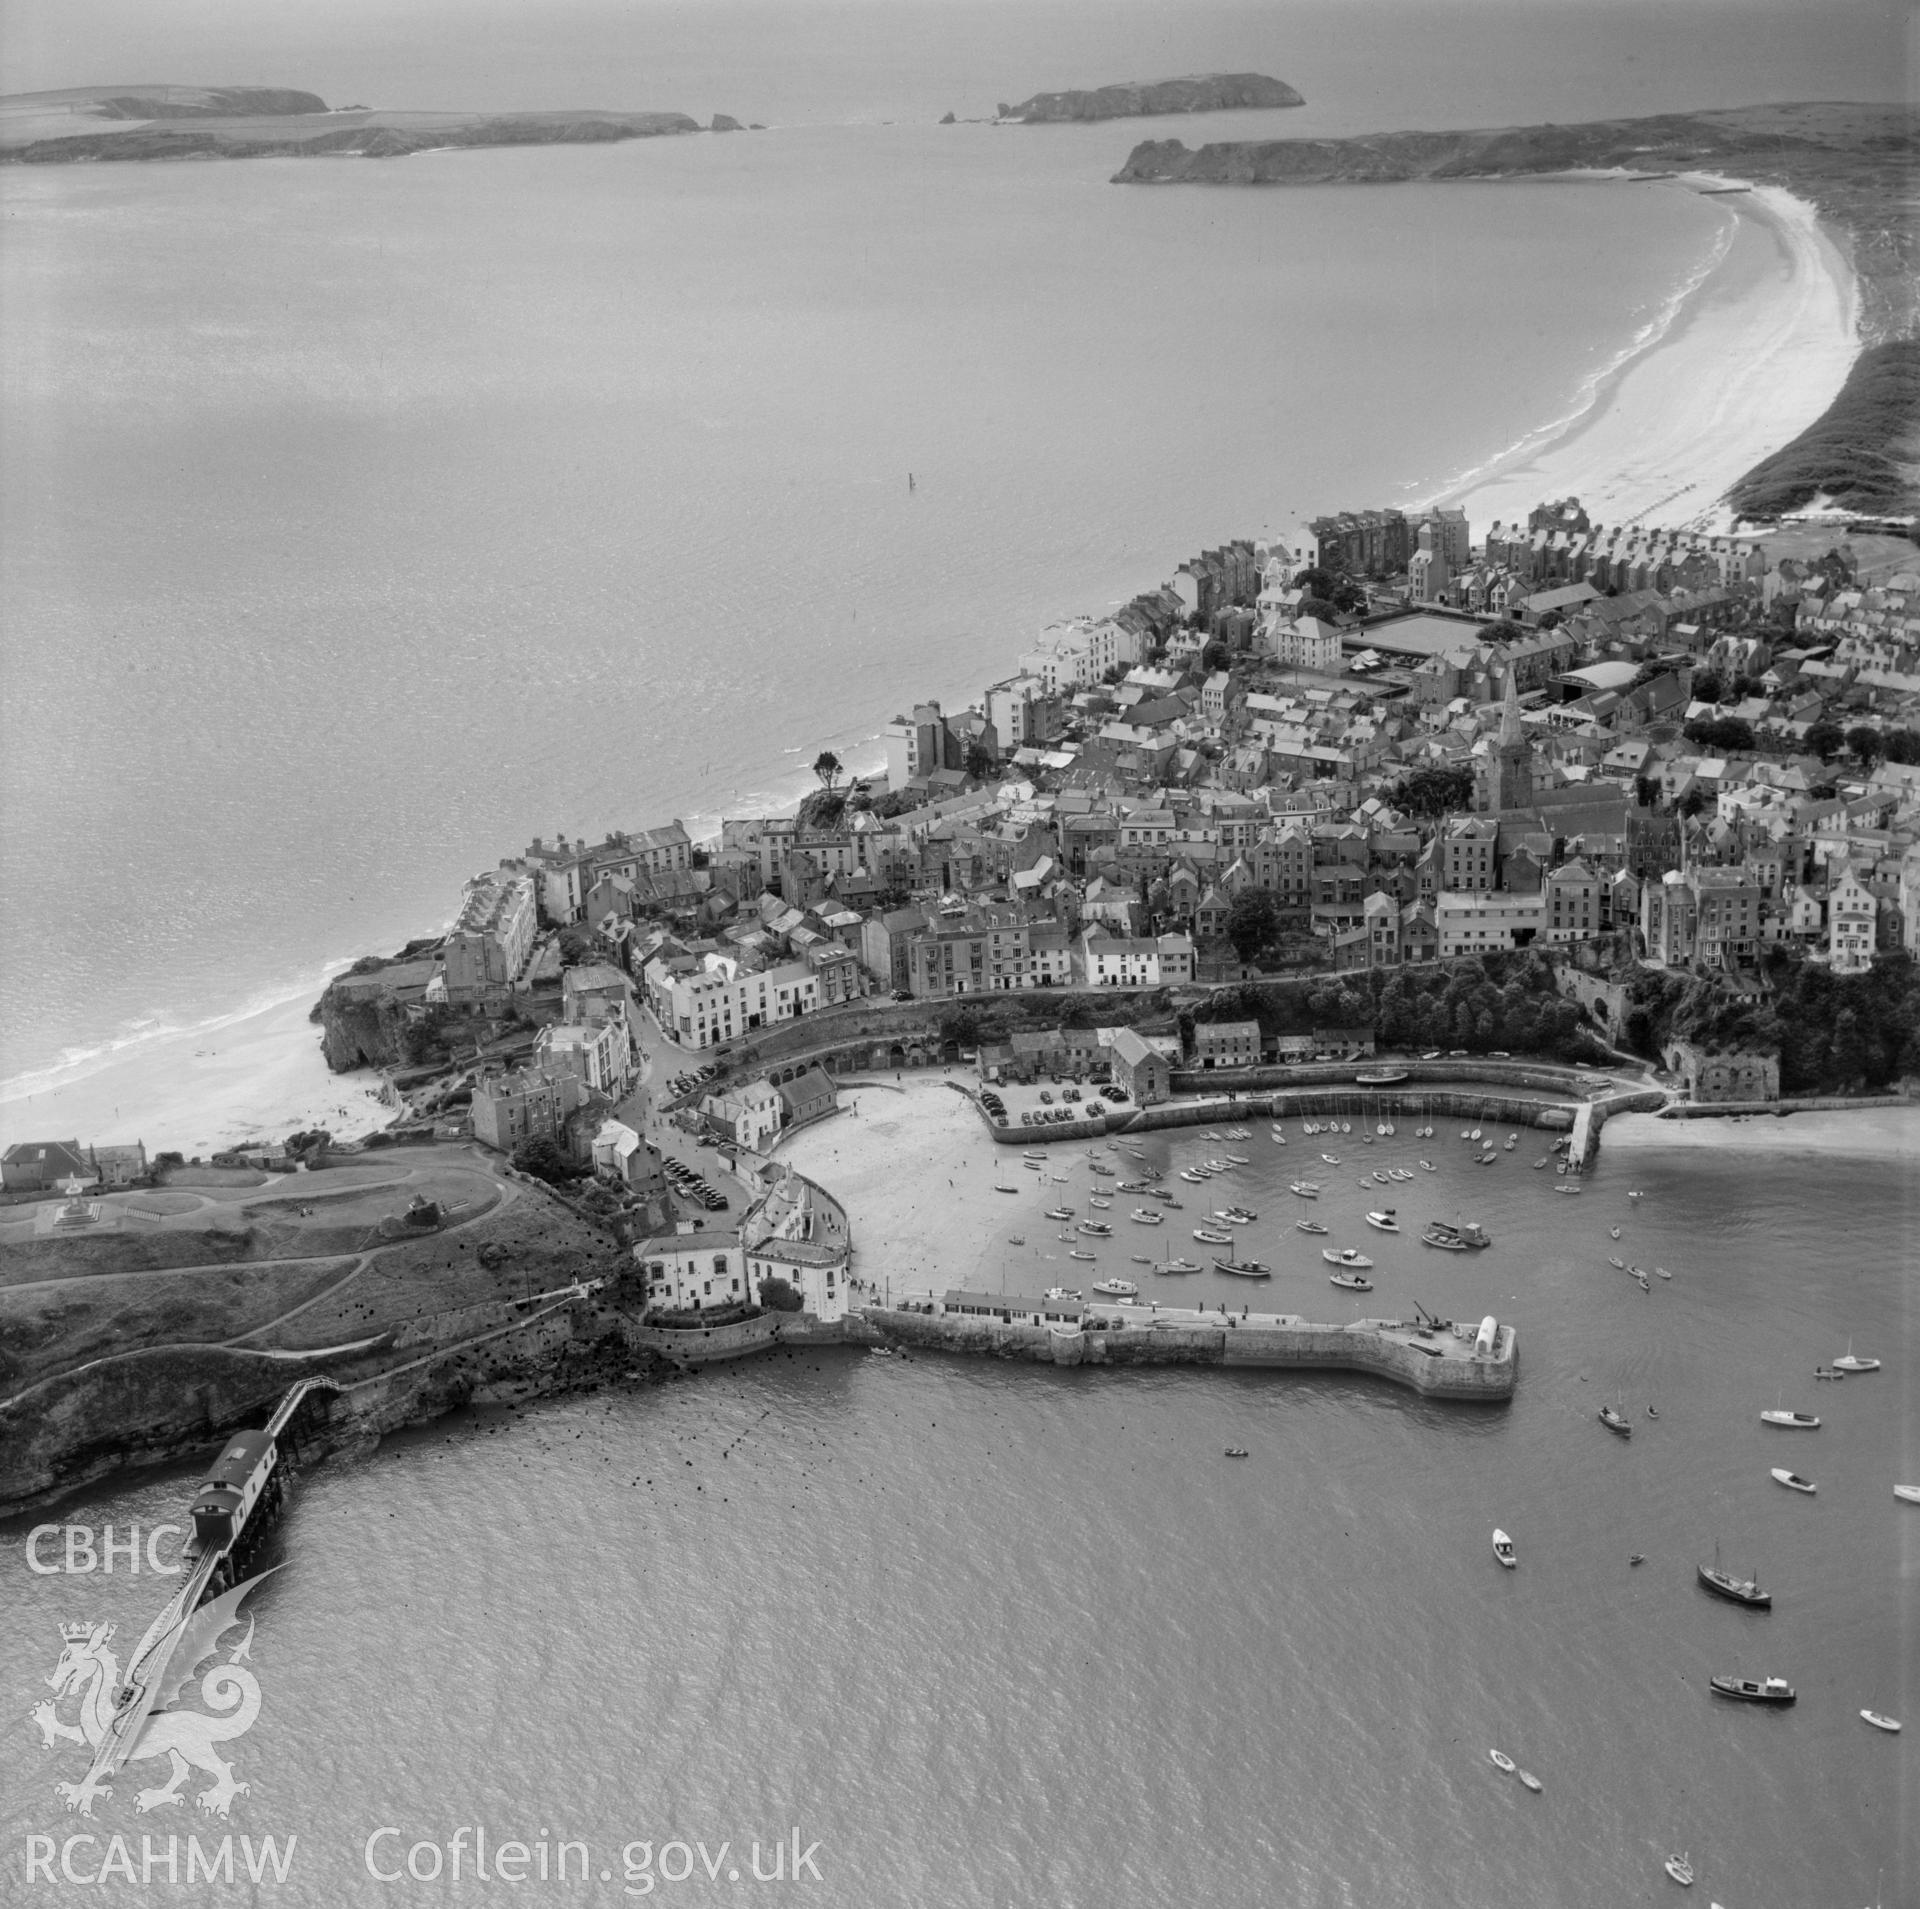 View of Tenby showing castle hill and lifeboat station